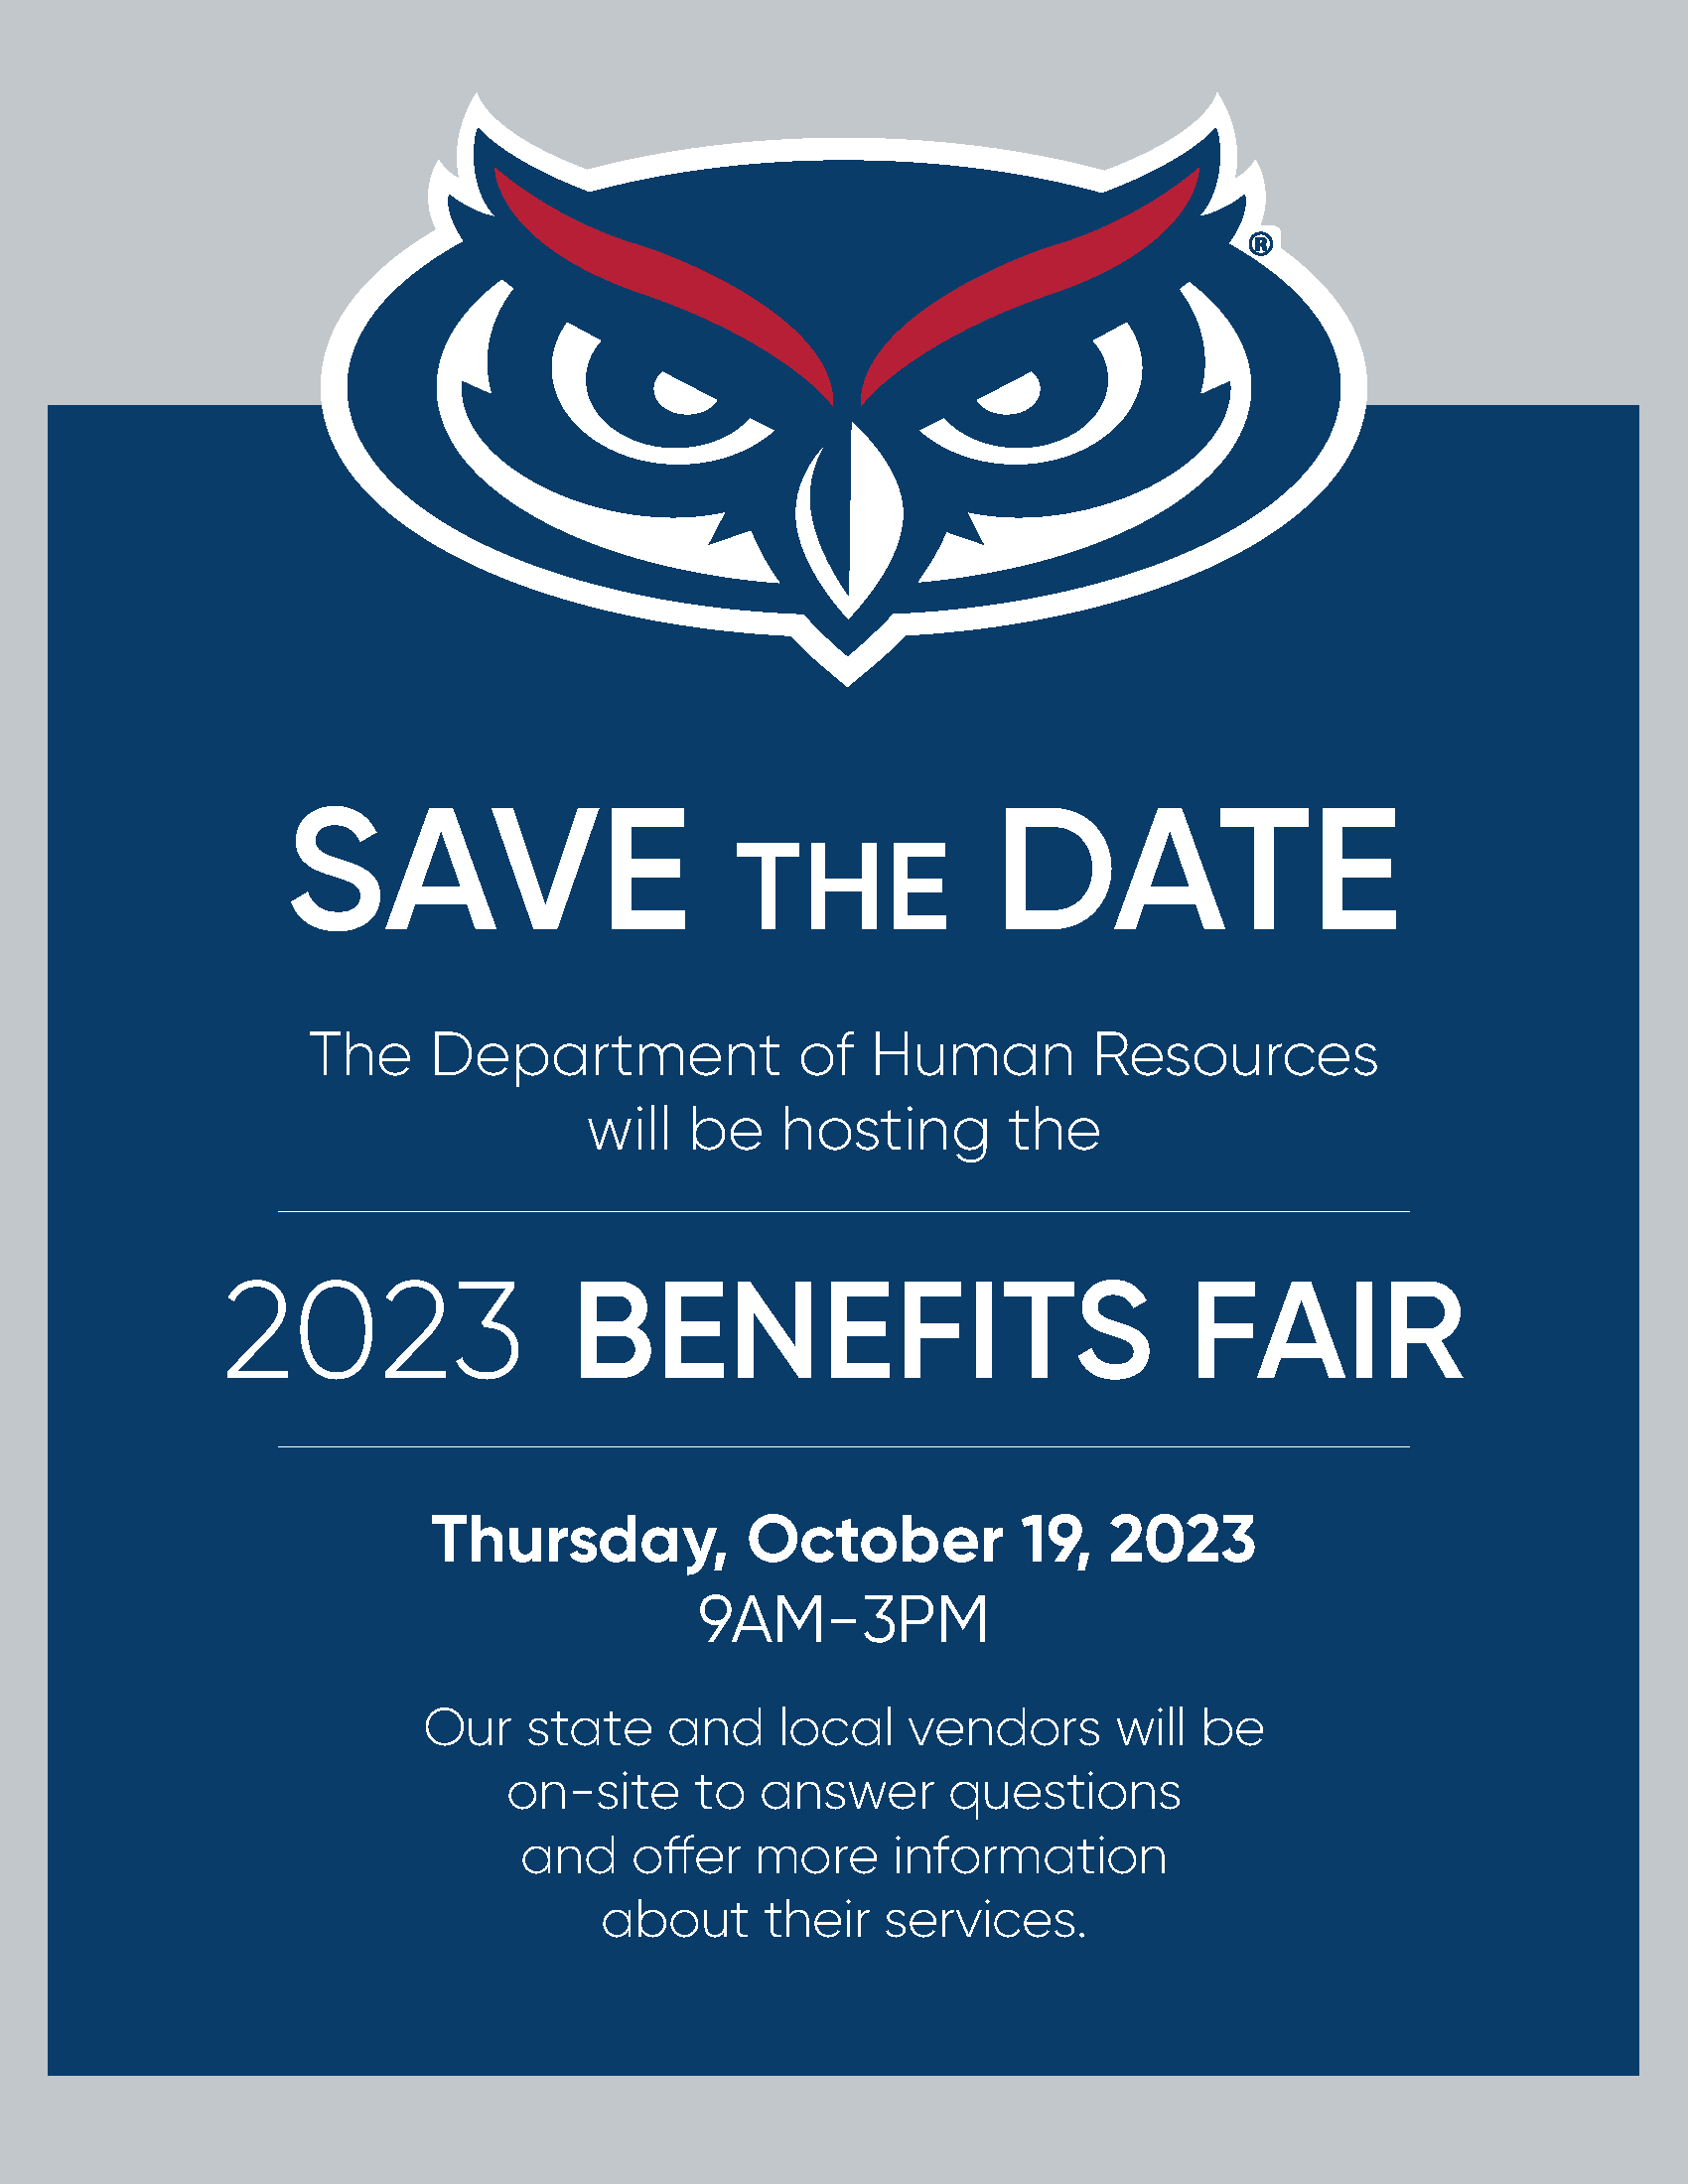 SAVE THE DATE : 2023 BENEFITS FAIR 